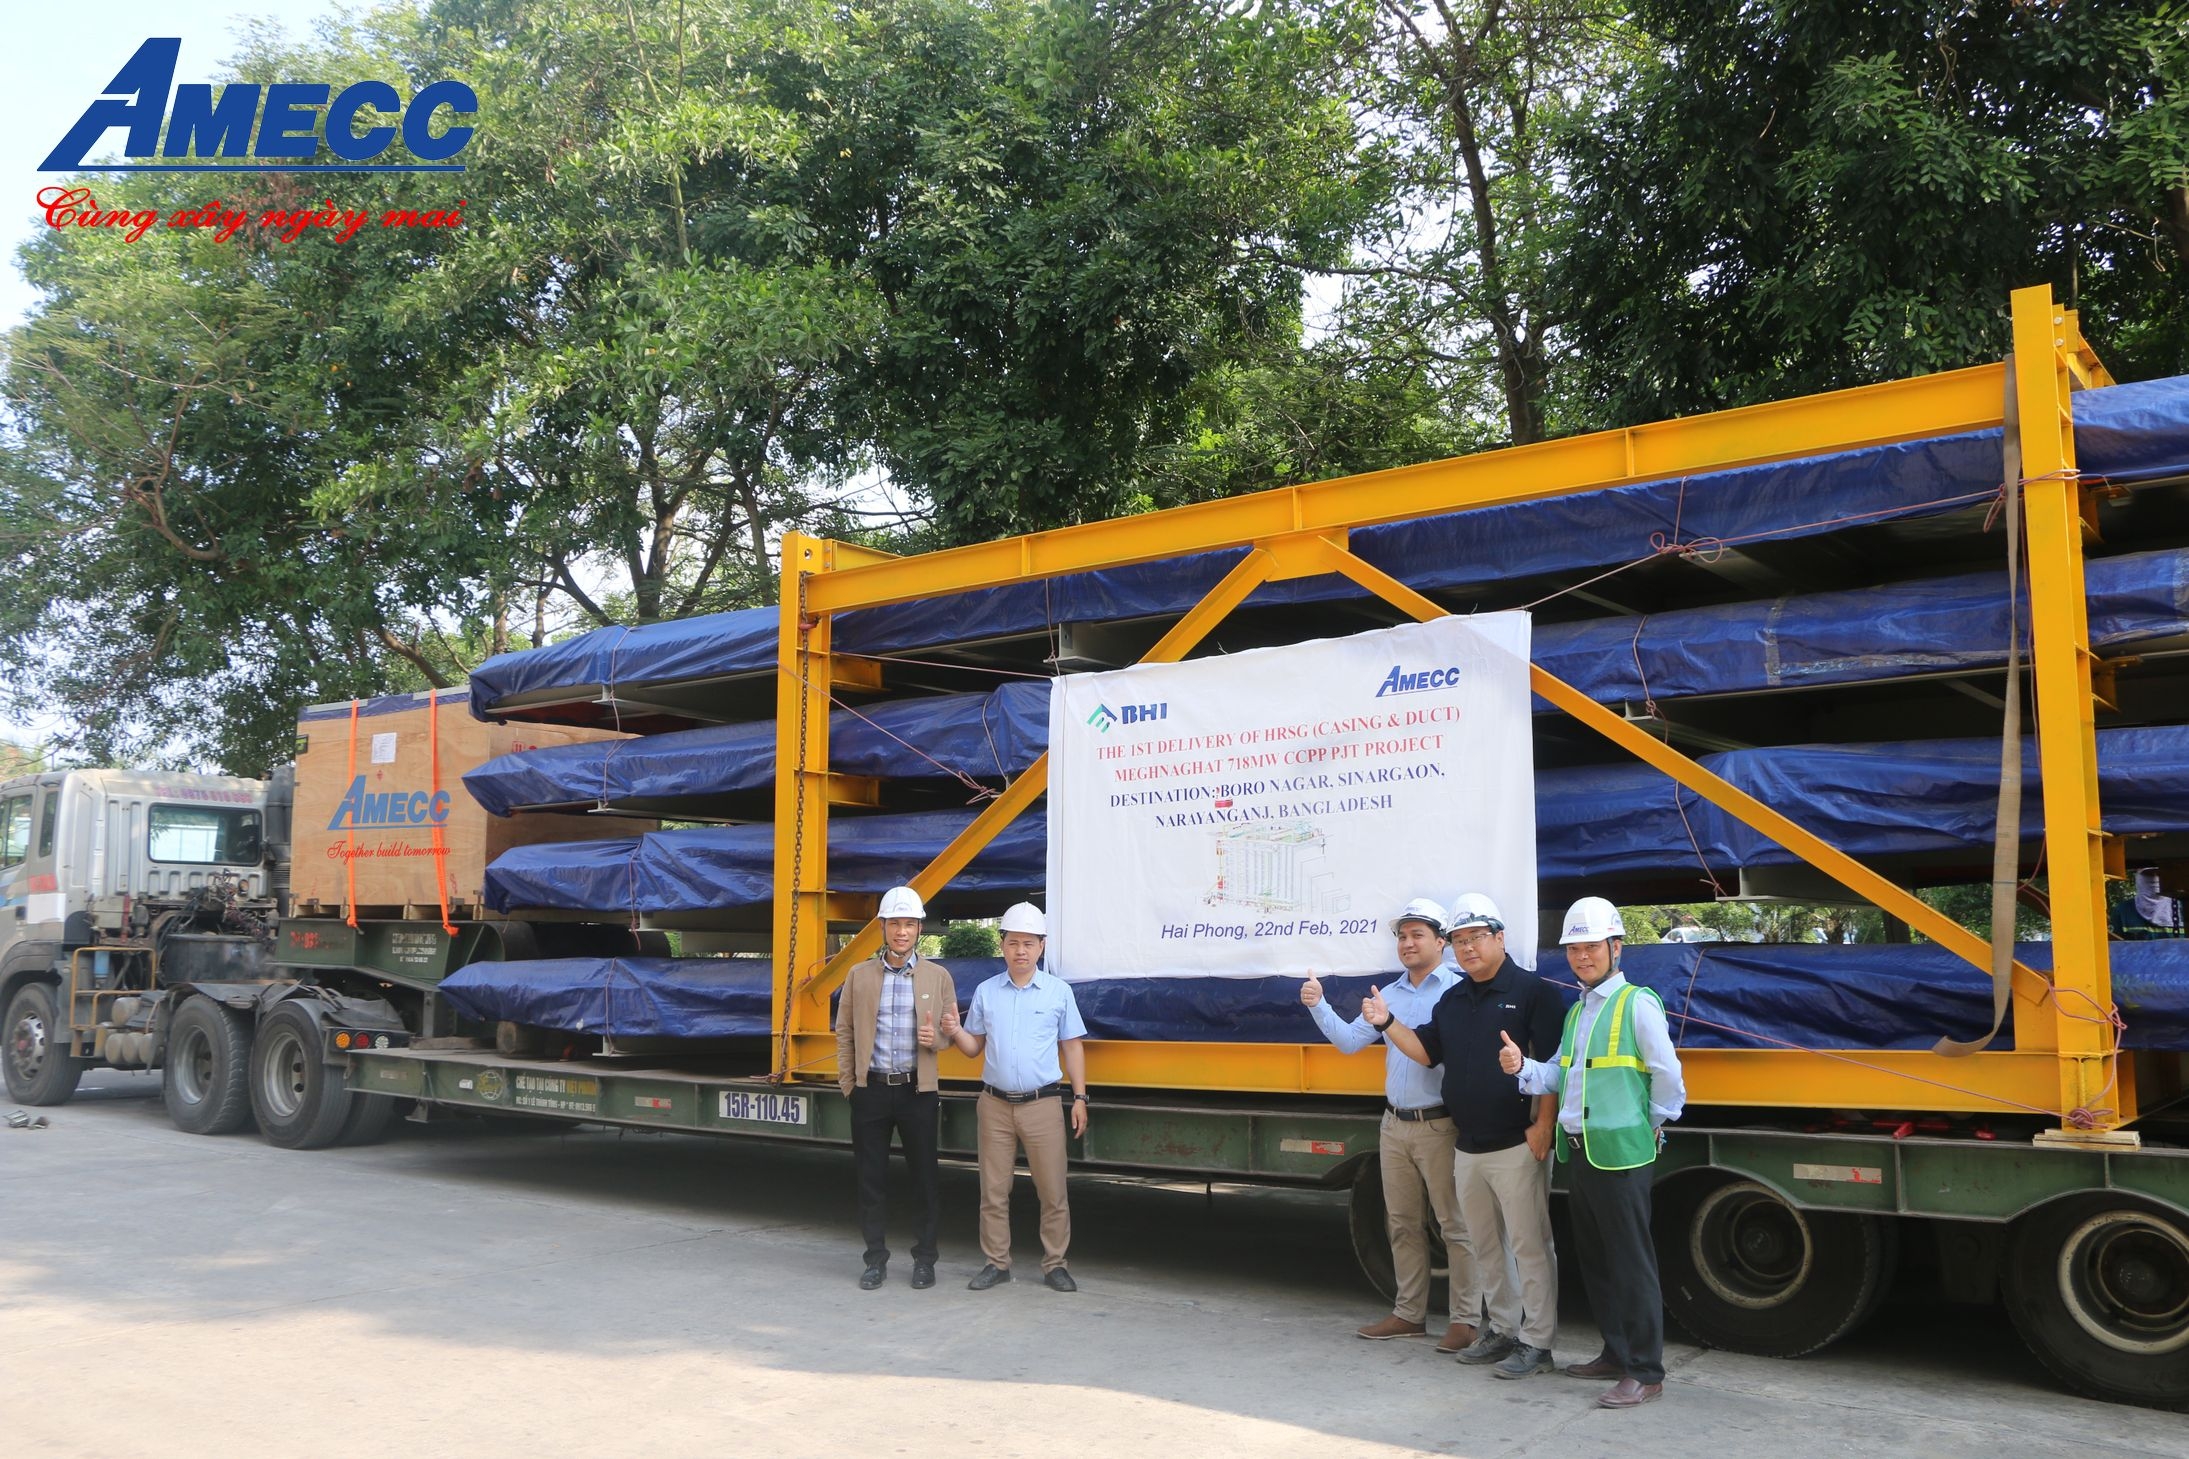 AMECC - THE FIRST SHIPMENT OF NEW SPRING